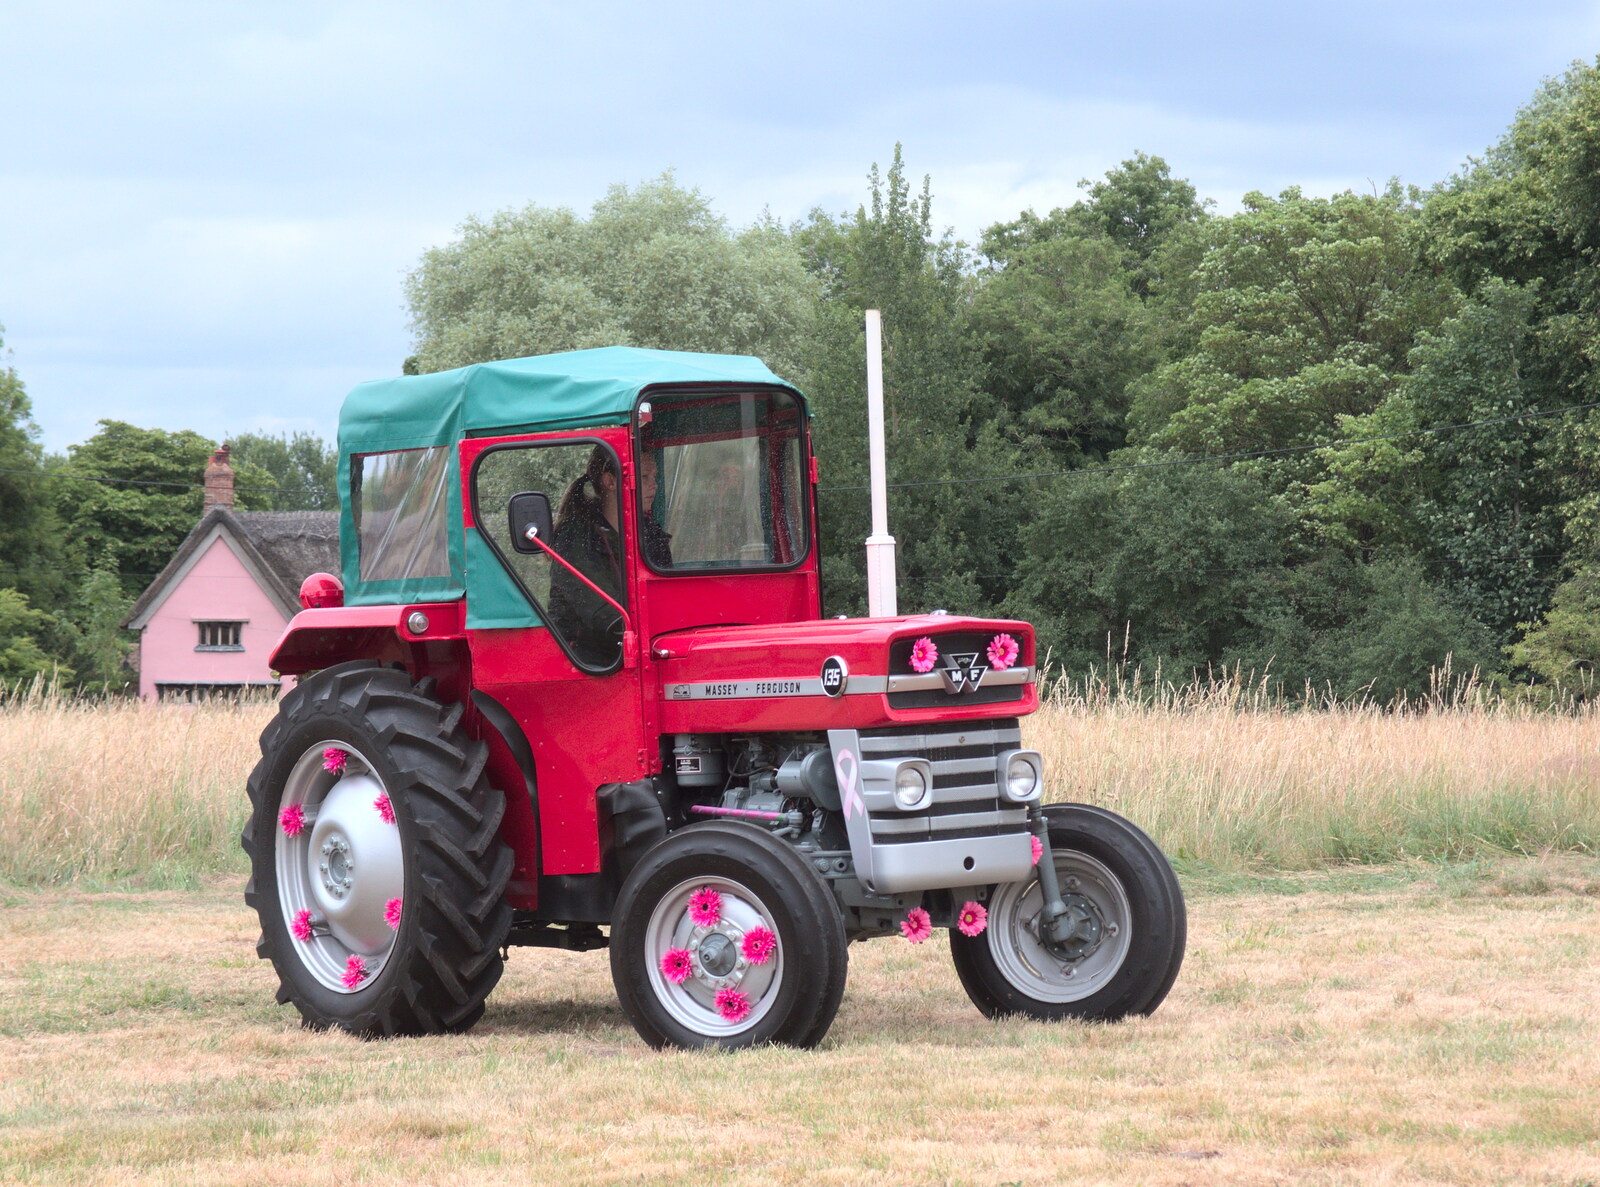 Another Massey with pink flowers from Thrandeston Pig, Little Green, Thrandeston, Suffolk - 25th June 2017